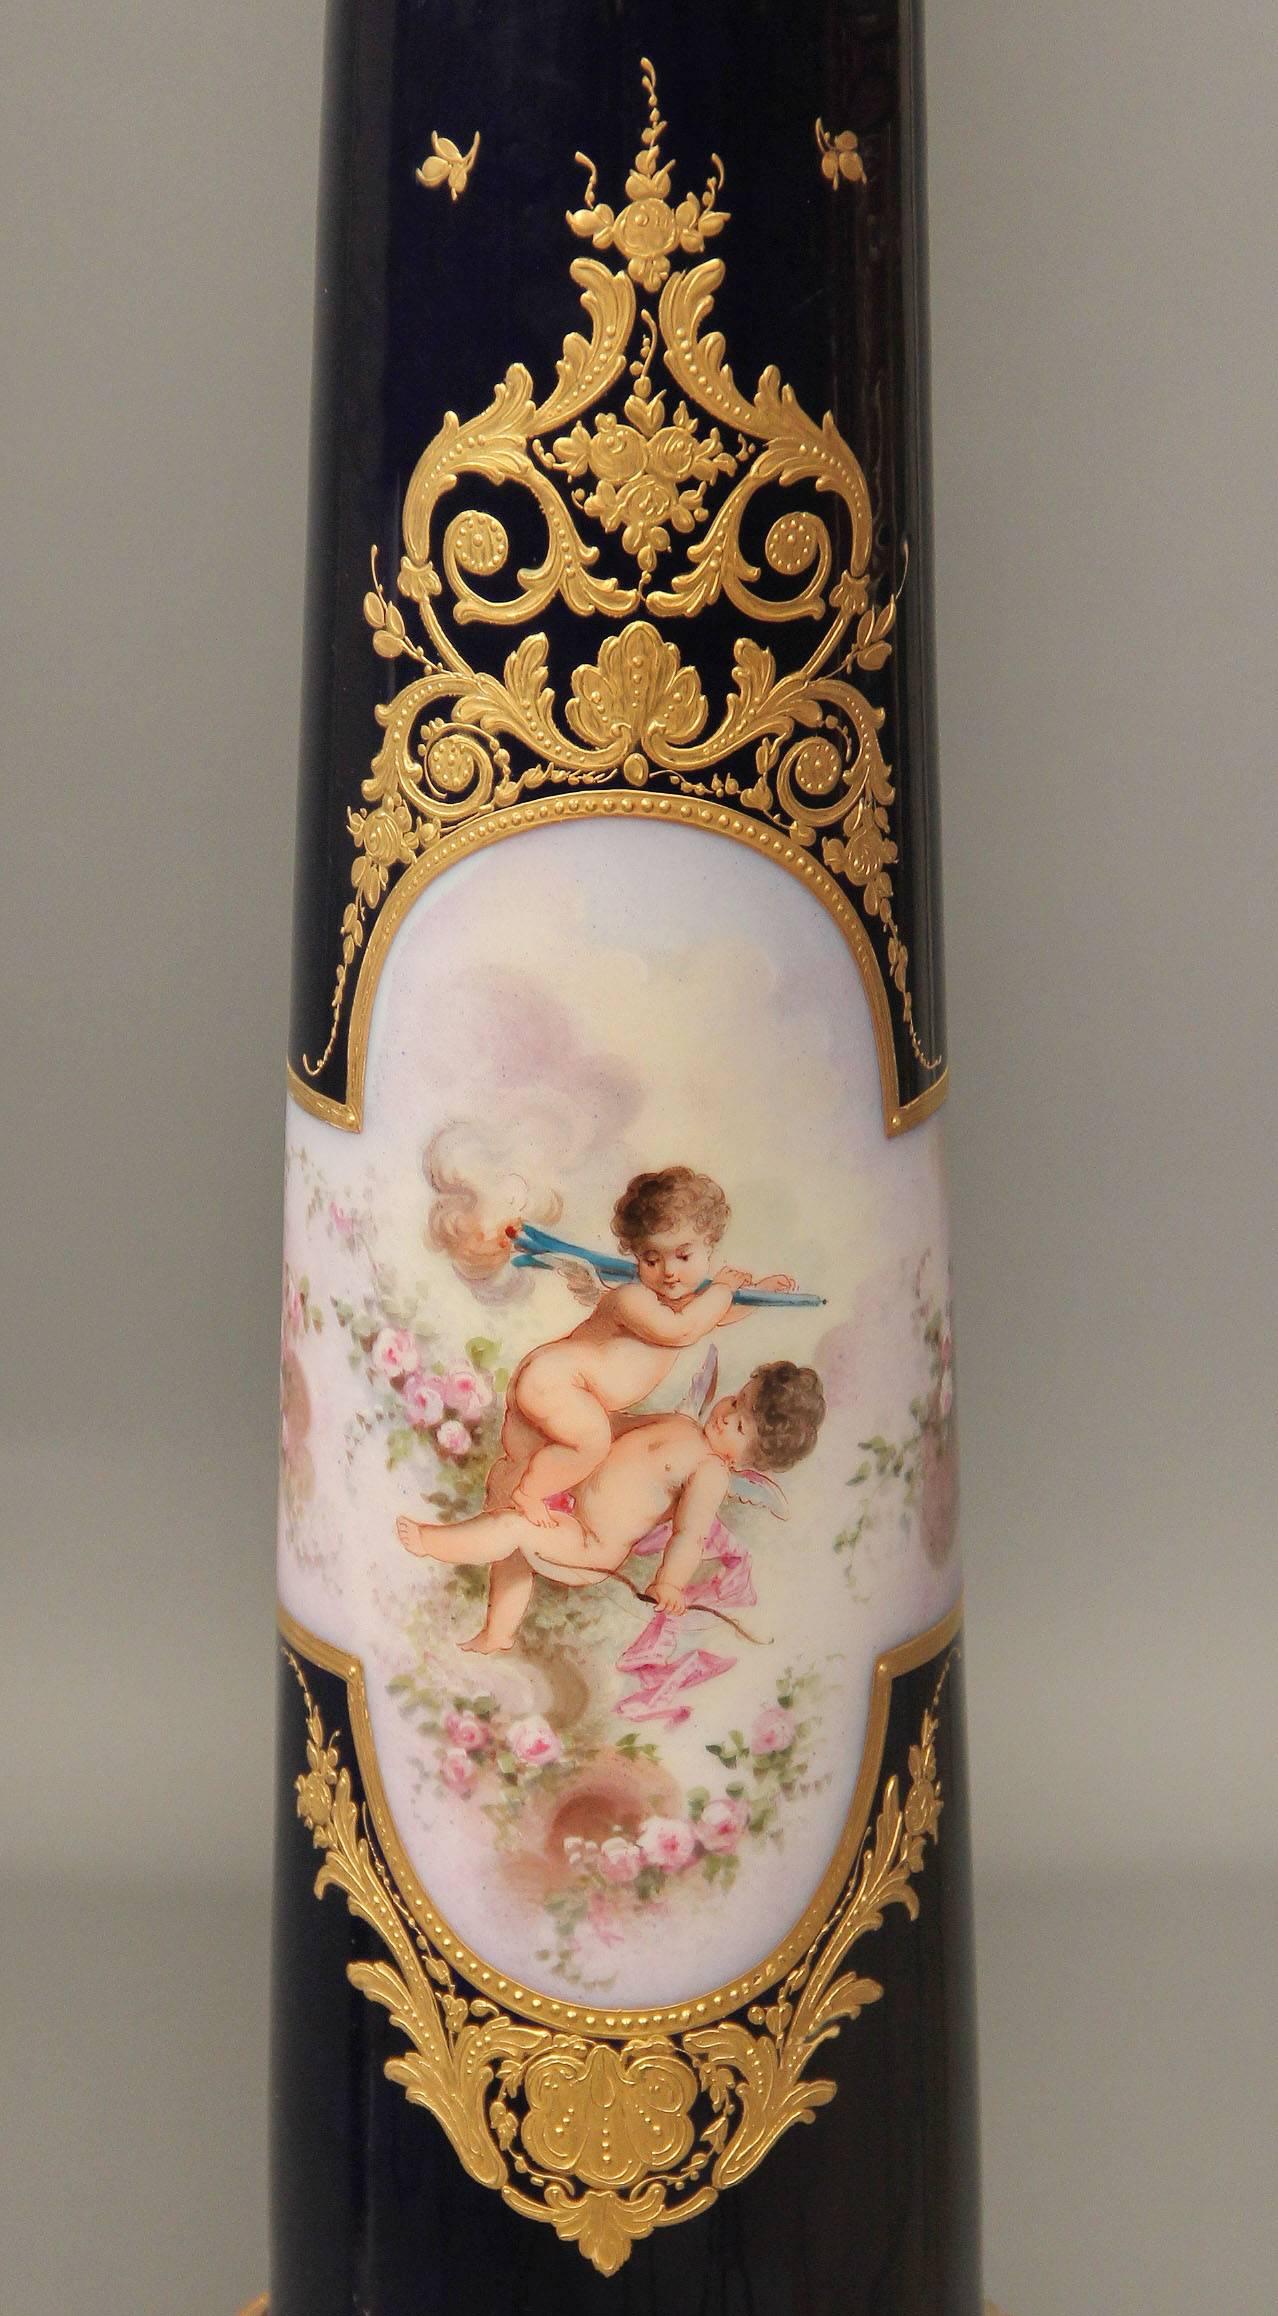 An exceptional pair of late 19th century gilt bronze mounted onyx and Sèvres style pedestals.

Square onyx top above a columnar support painted with lovely scenes of women and cherubs, the backs painted with musical instruments, trophies and